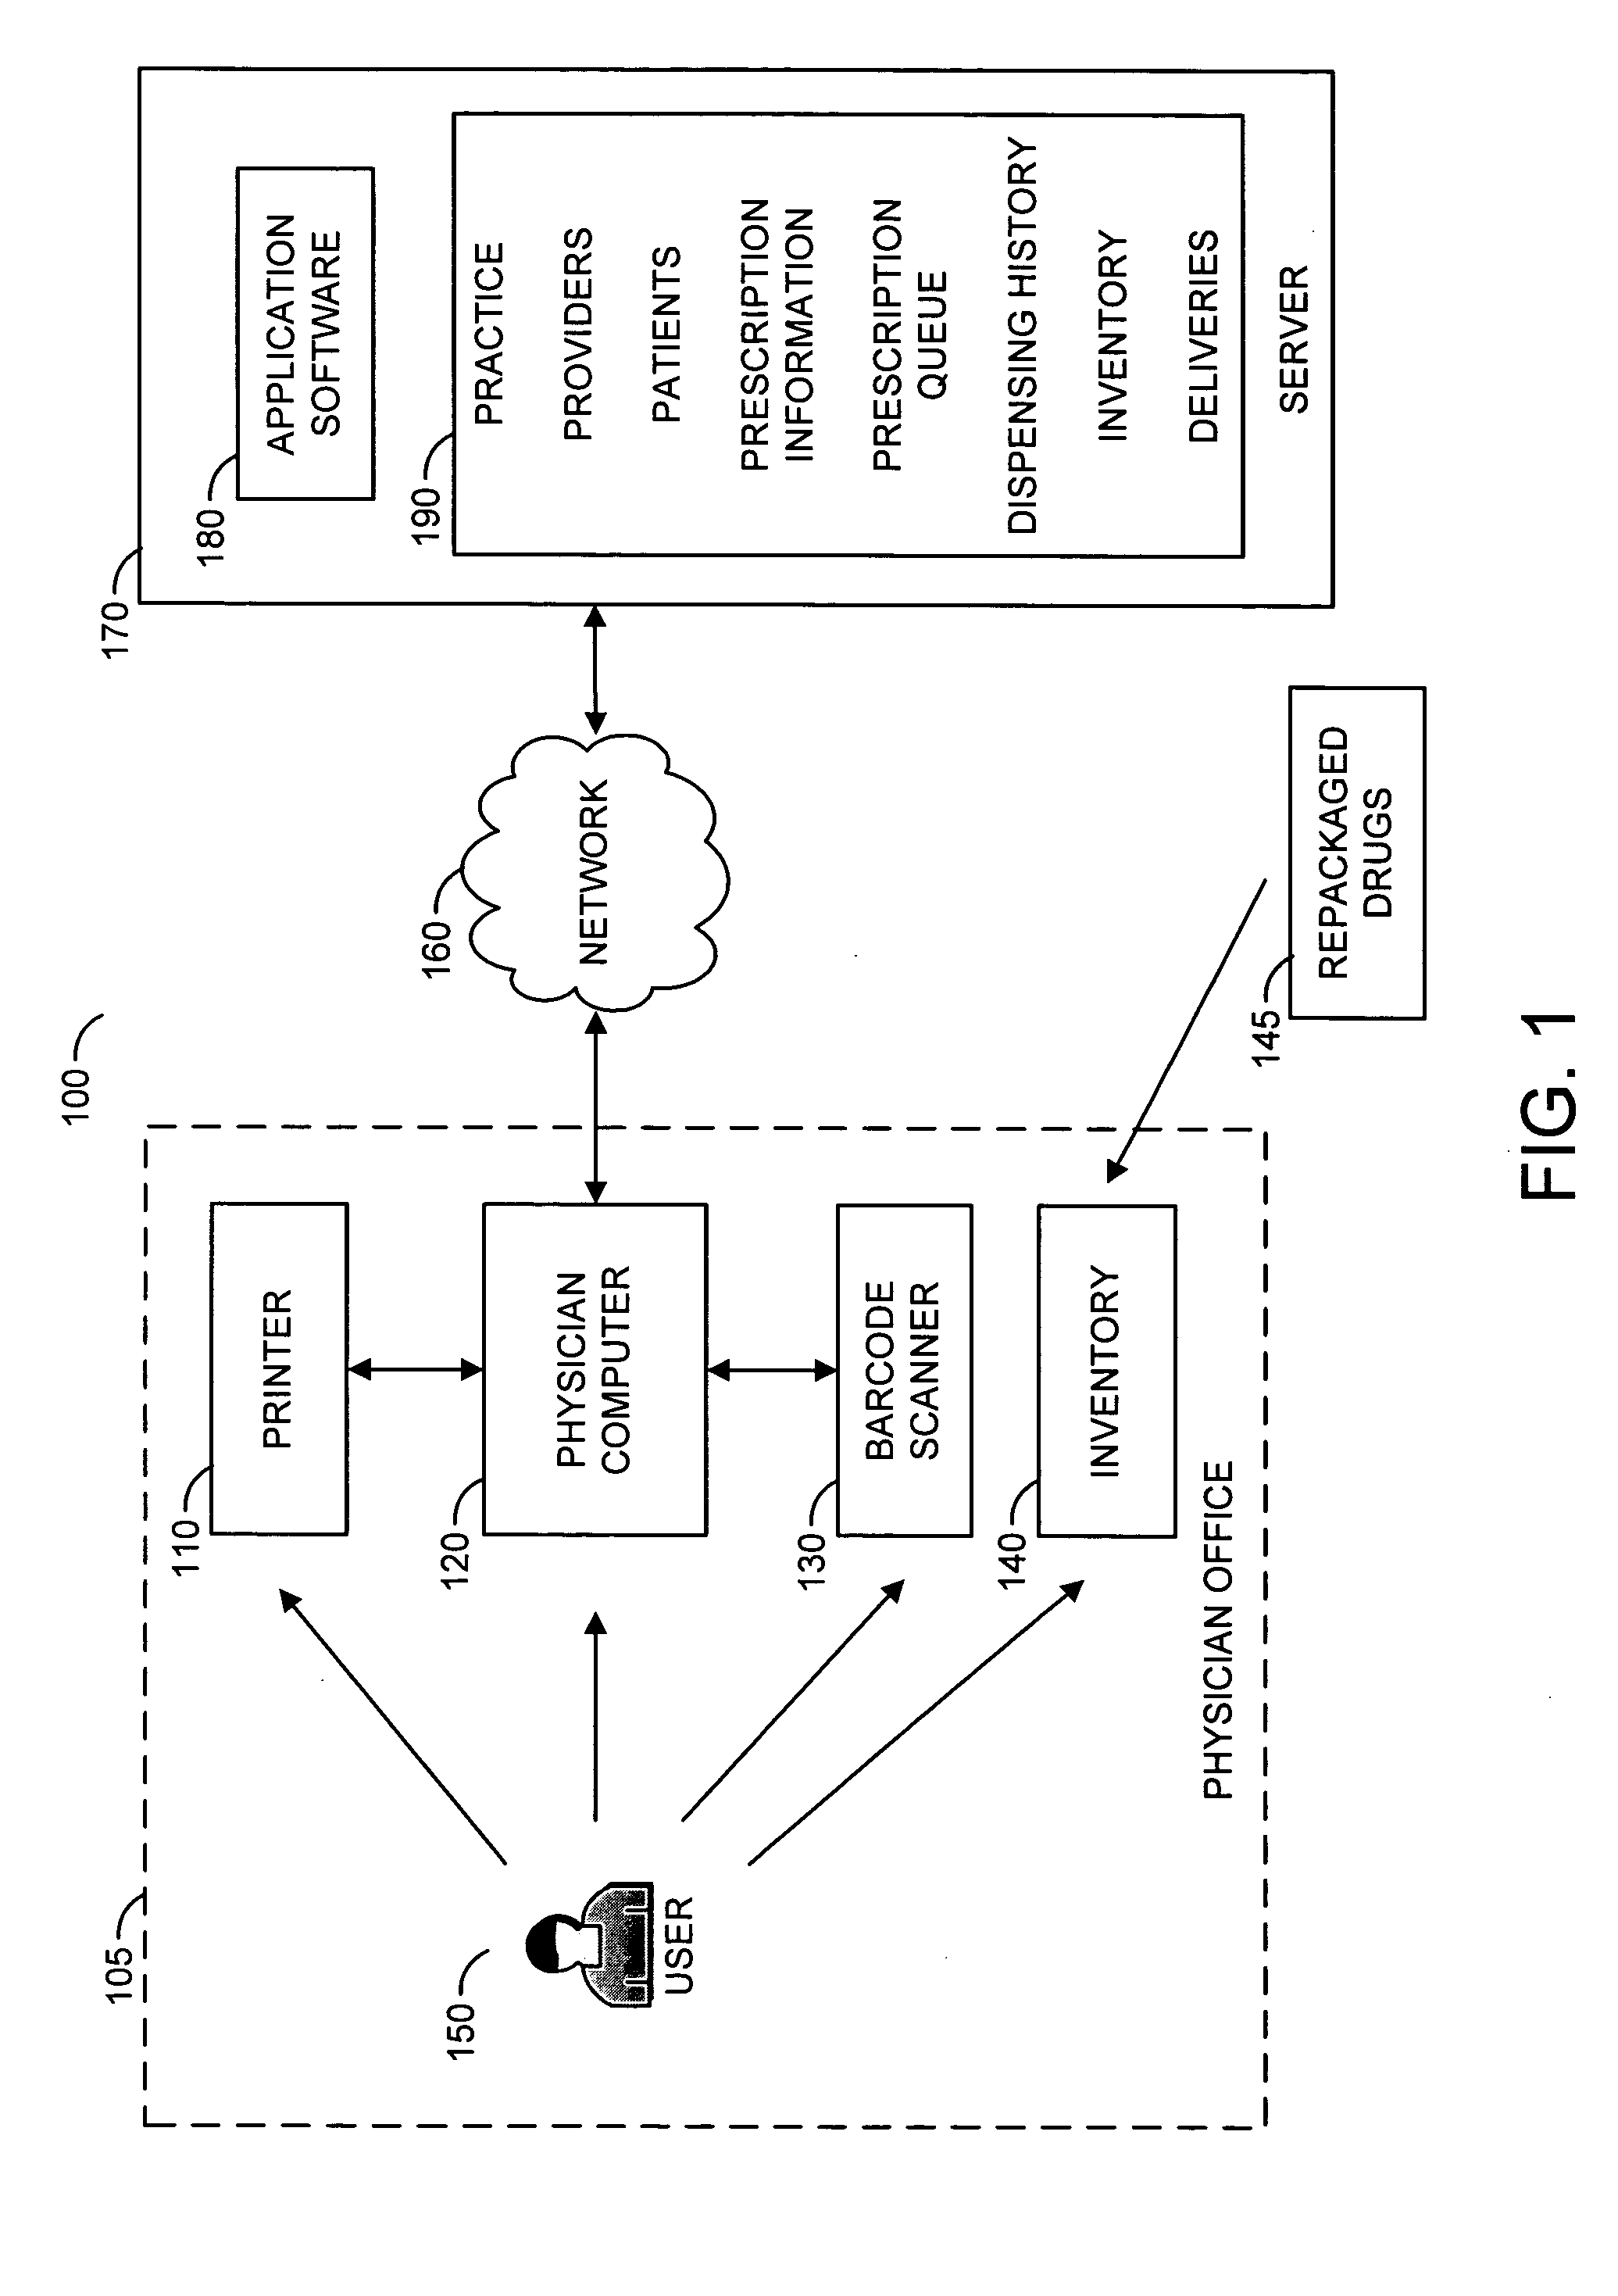 Dispensing system with real time inventory management